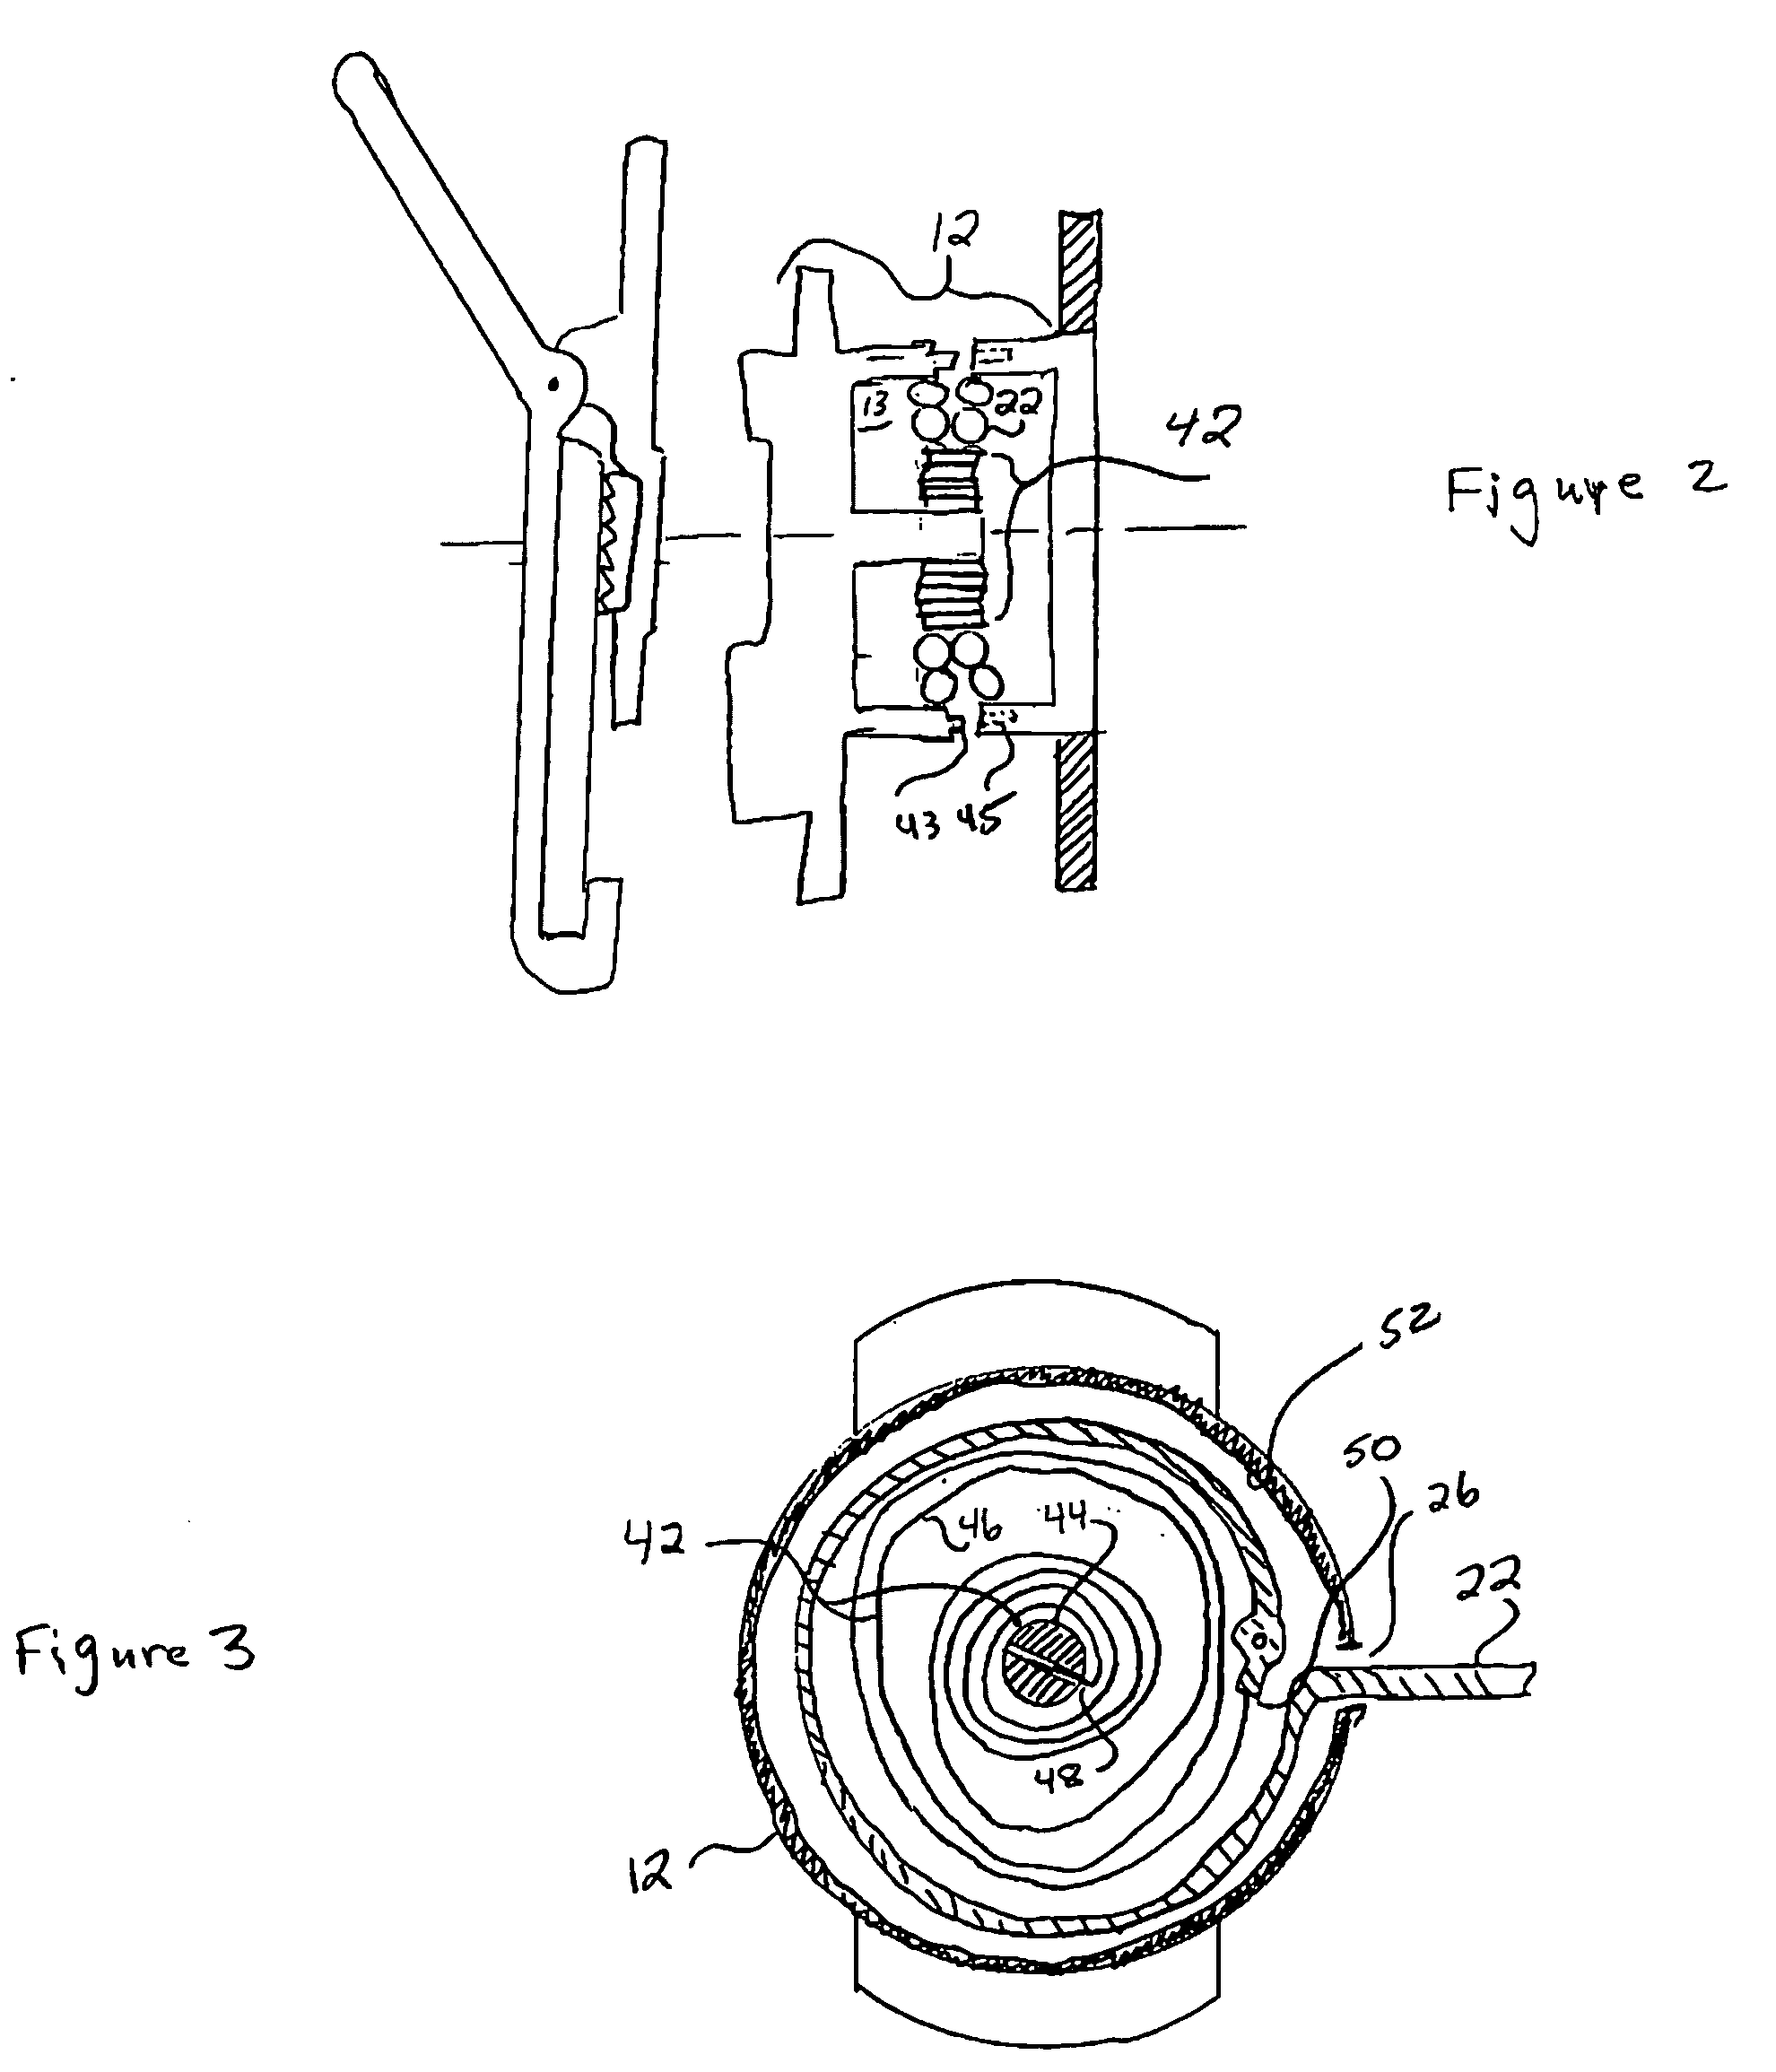 Retractable cord assembly for securing portable electronic devices